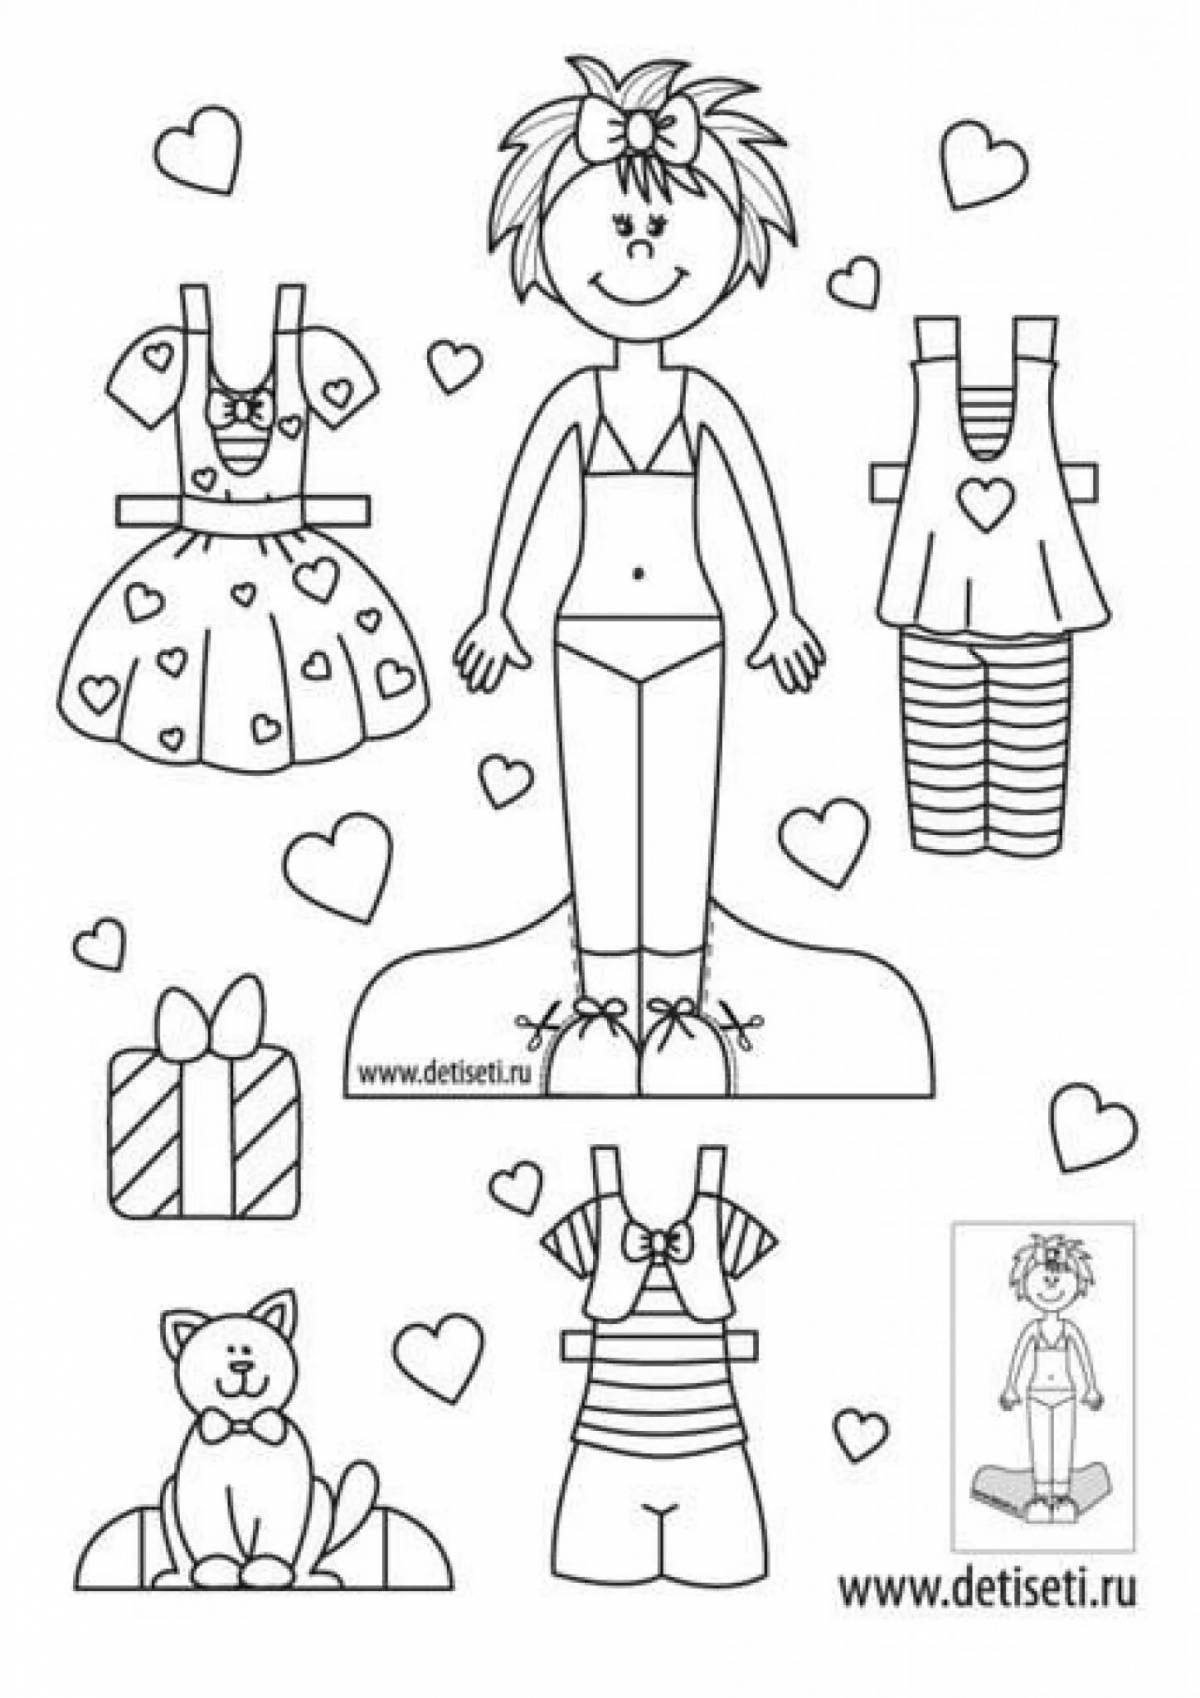 Colorful coloring pages for the whole family